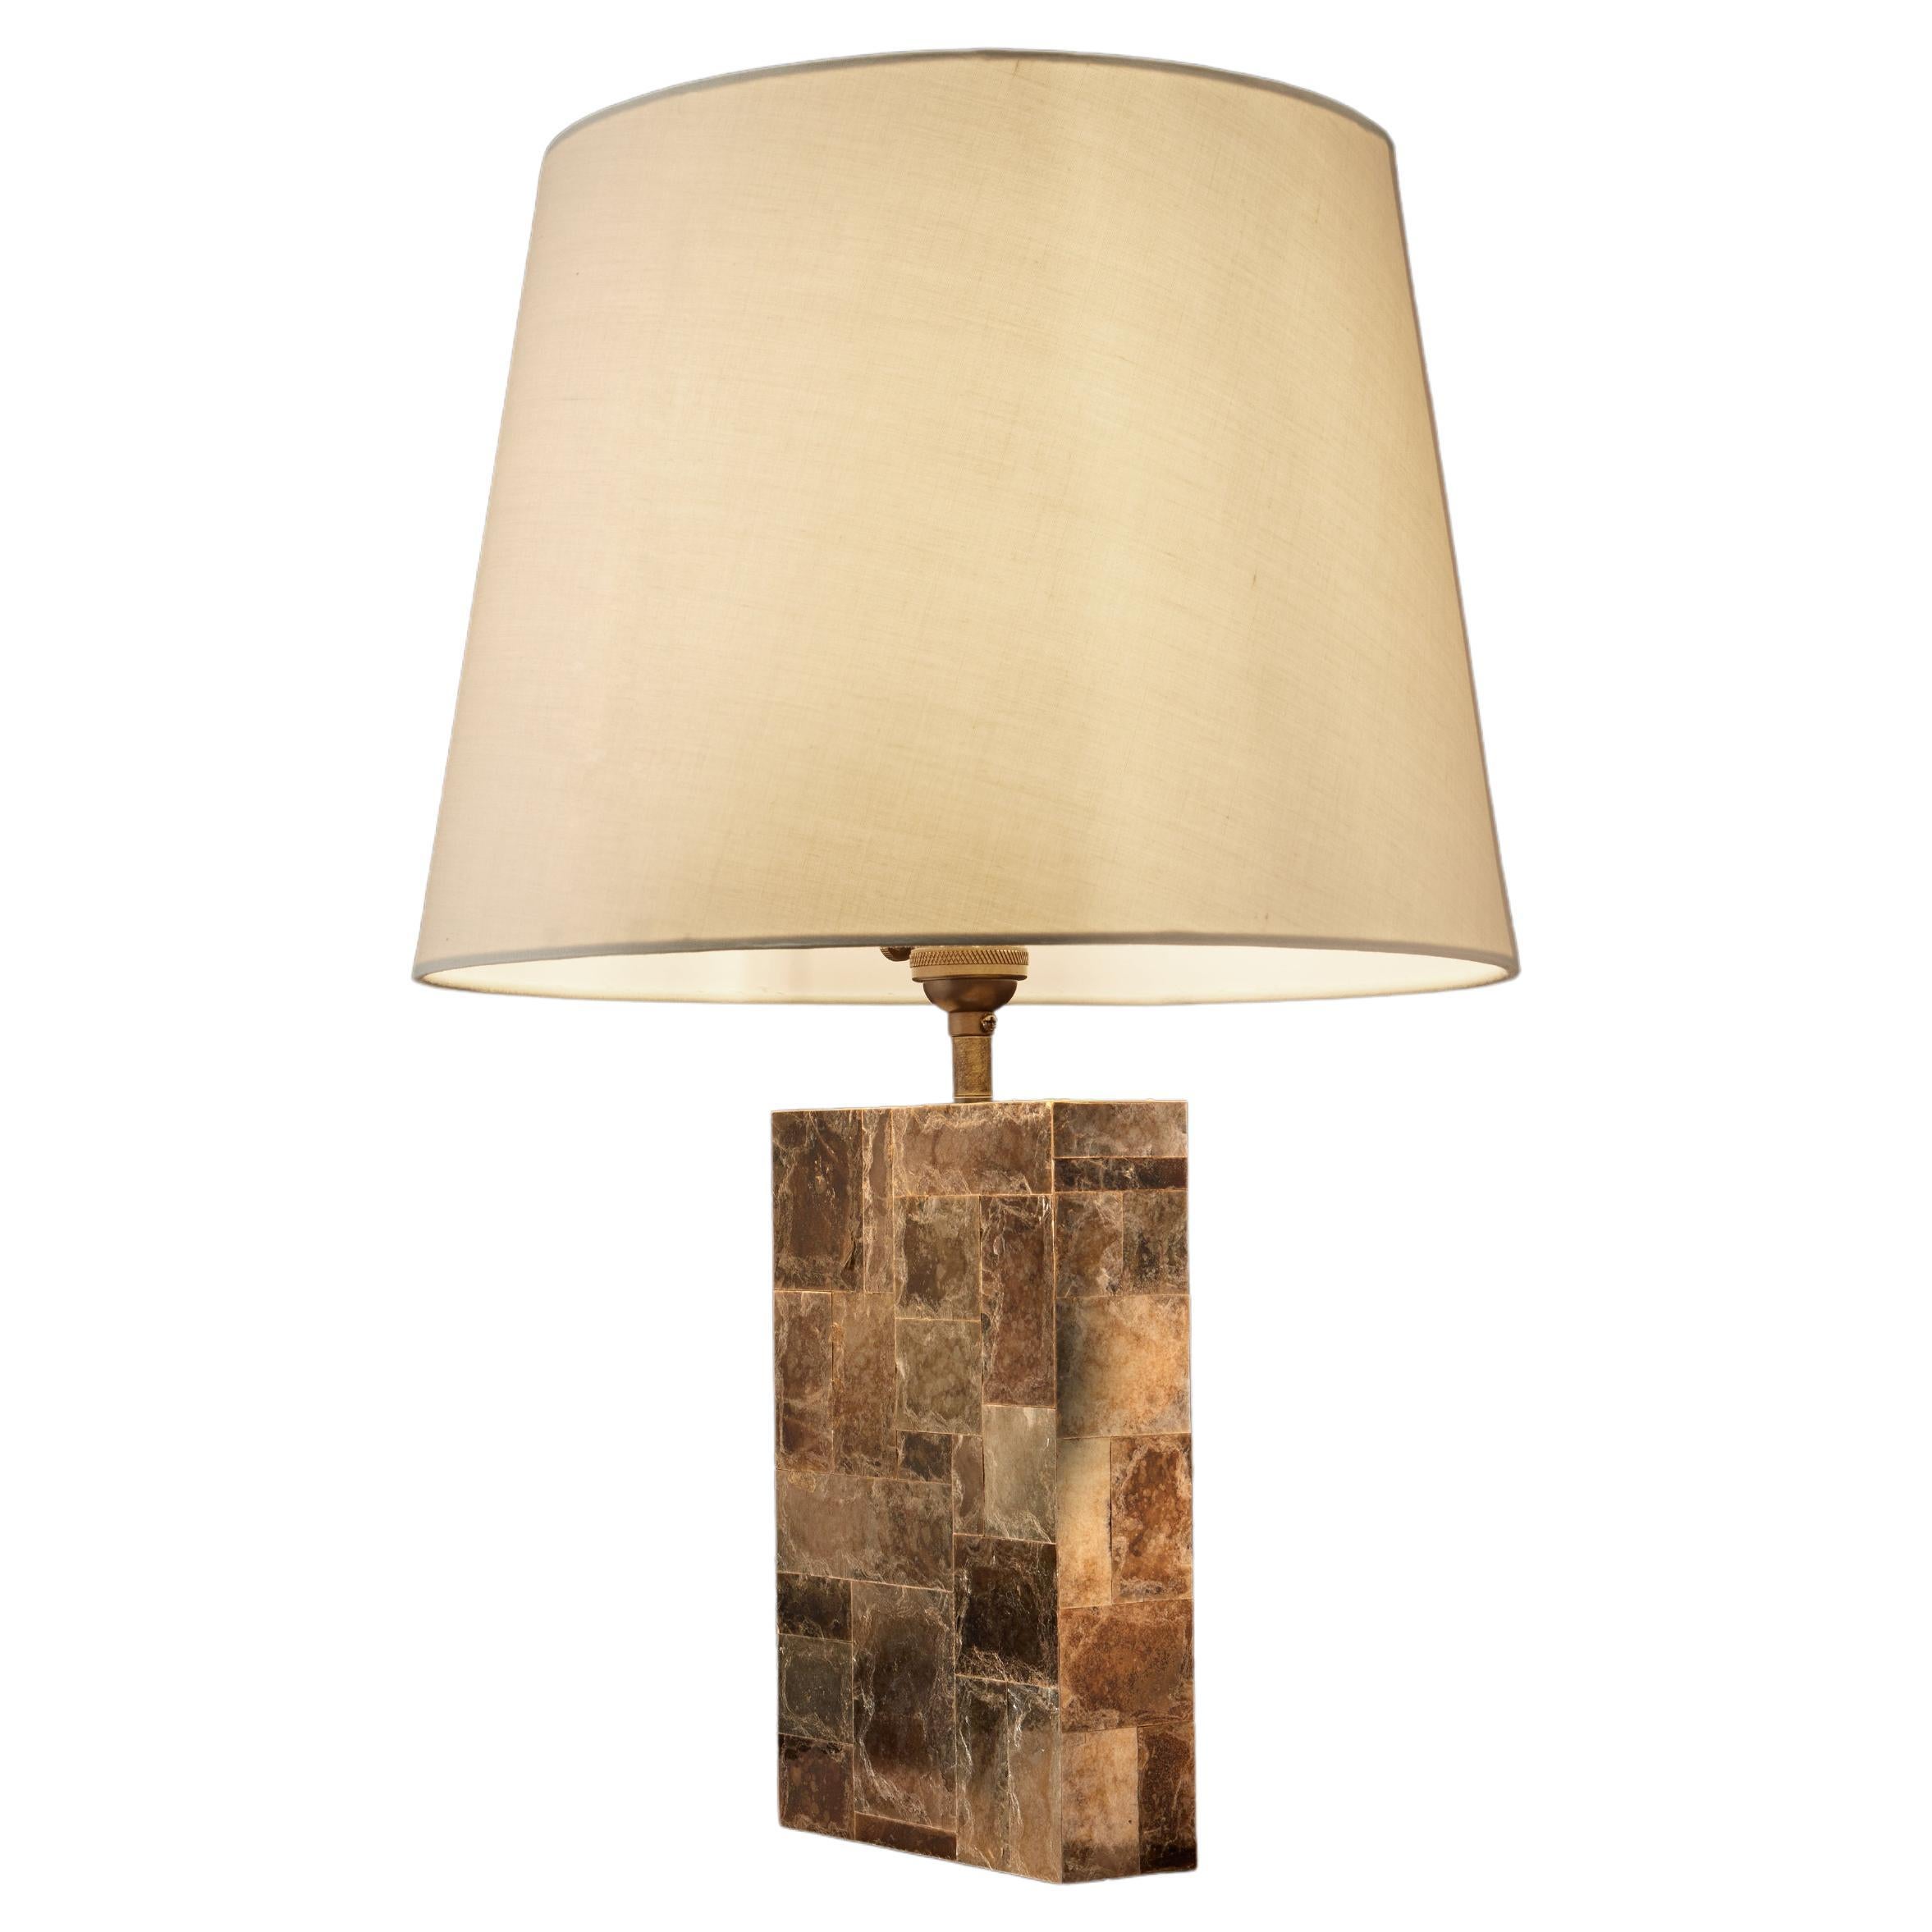 Lovely handmade mica and patinated brass table lamp. The mica glistens and shimmers under the soft glow of the lamp. The standard version of this lamp uses amber mica, but white or black mica can also be used. Mica is a naturally occurring stone